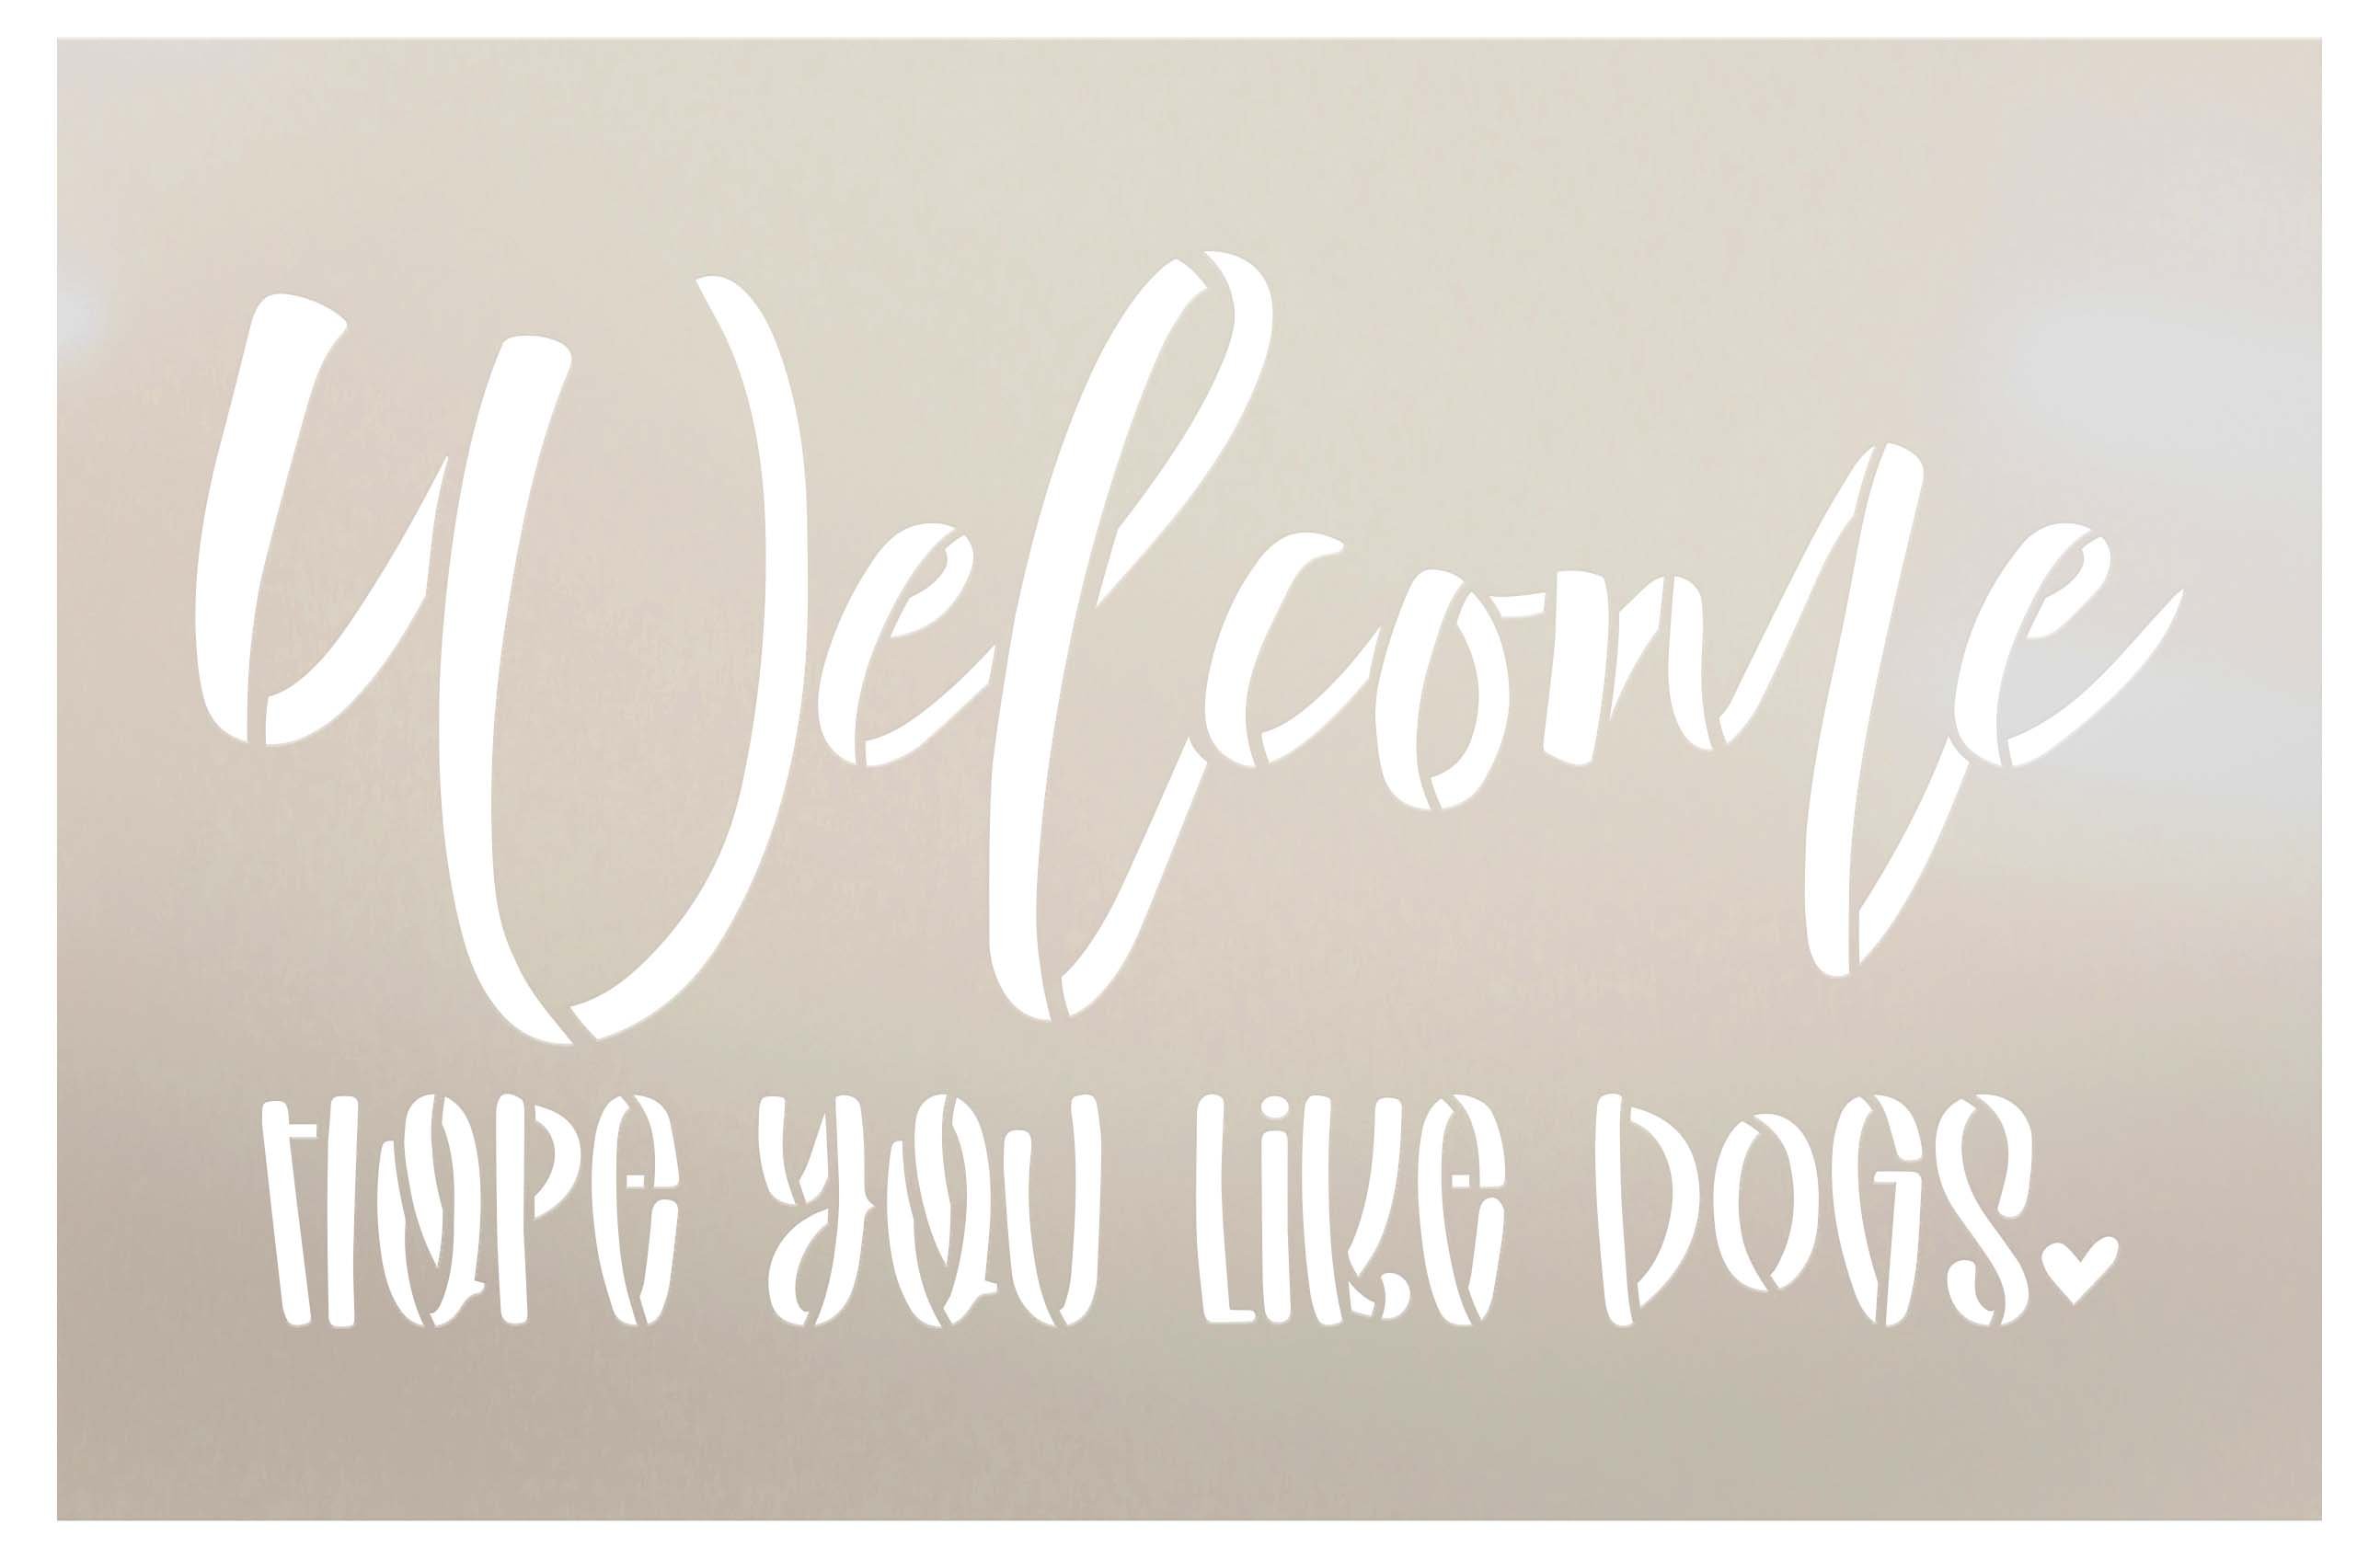 Welcome Hope You Like Dogs Doormat Stencil by StudioR12 | DIY Doormat | Craft & Paint Funny Word Art Home Decor | Select Size